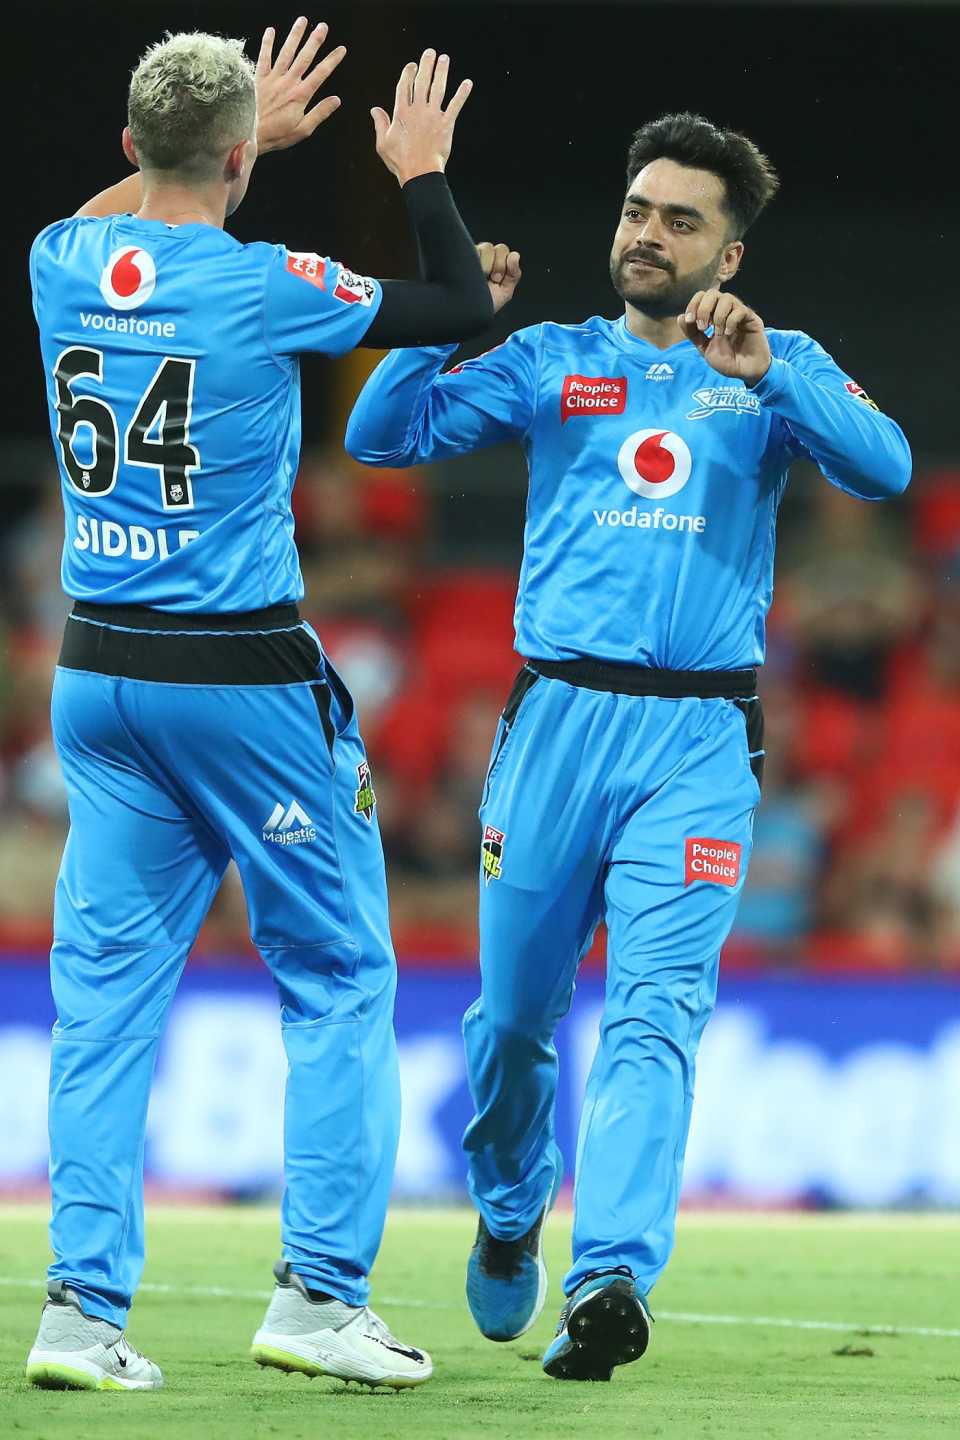 Rashid Khan returned 3 for 18 but couldn't prevent a loss for his side